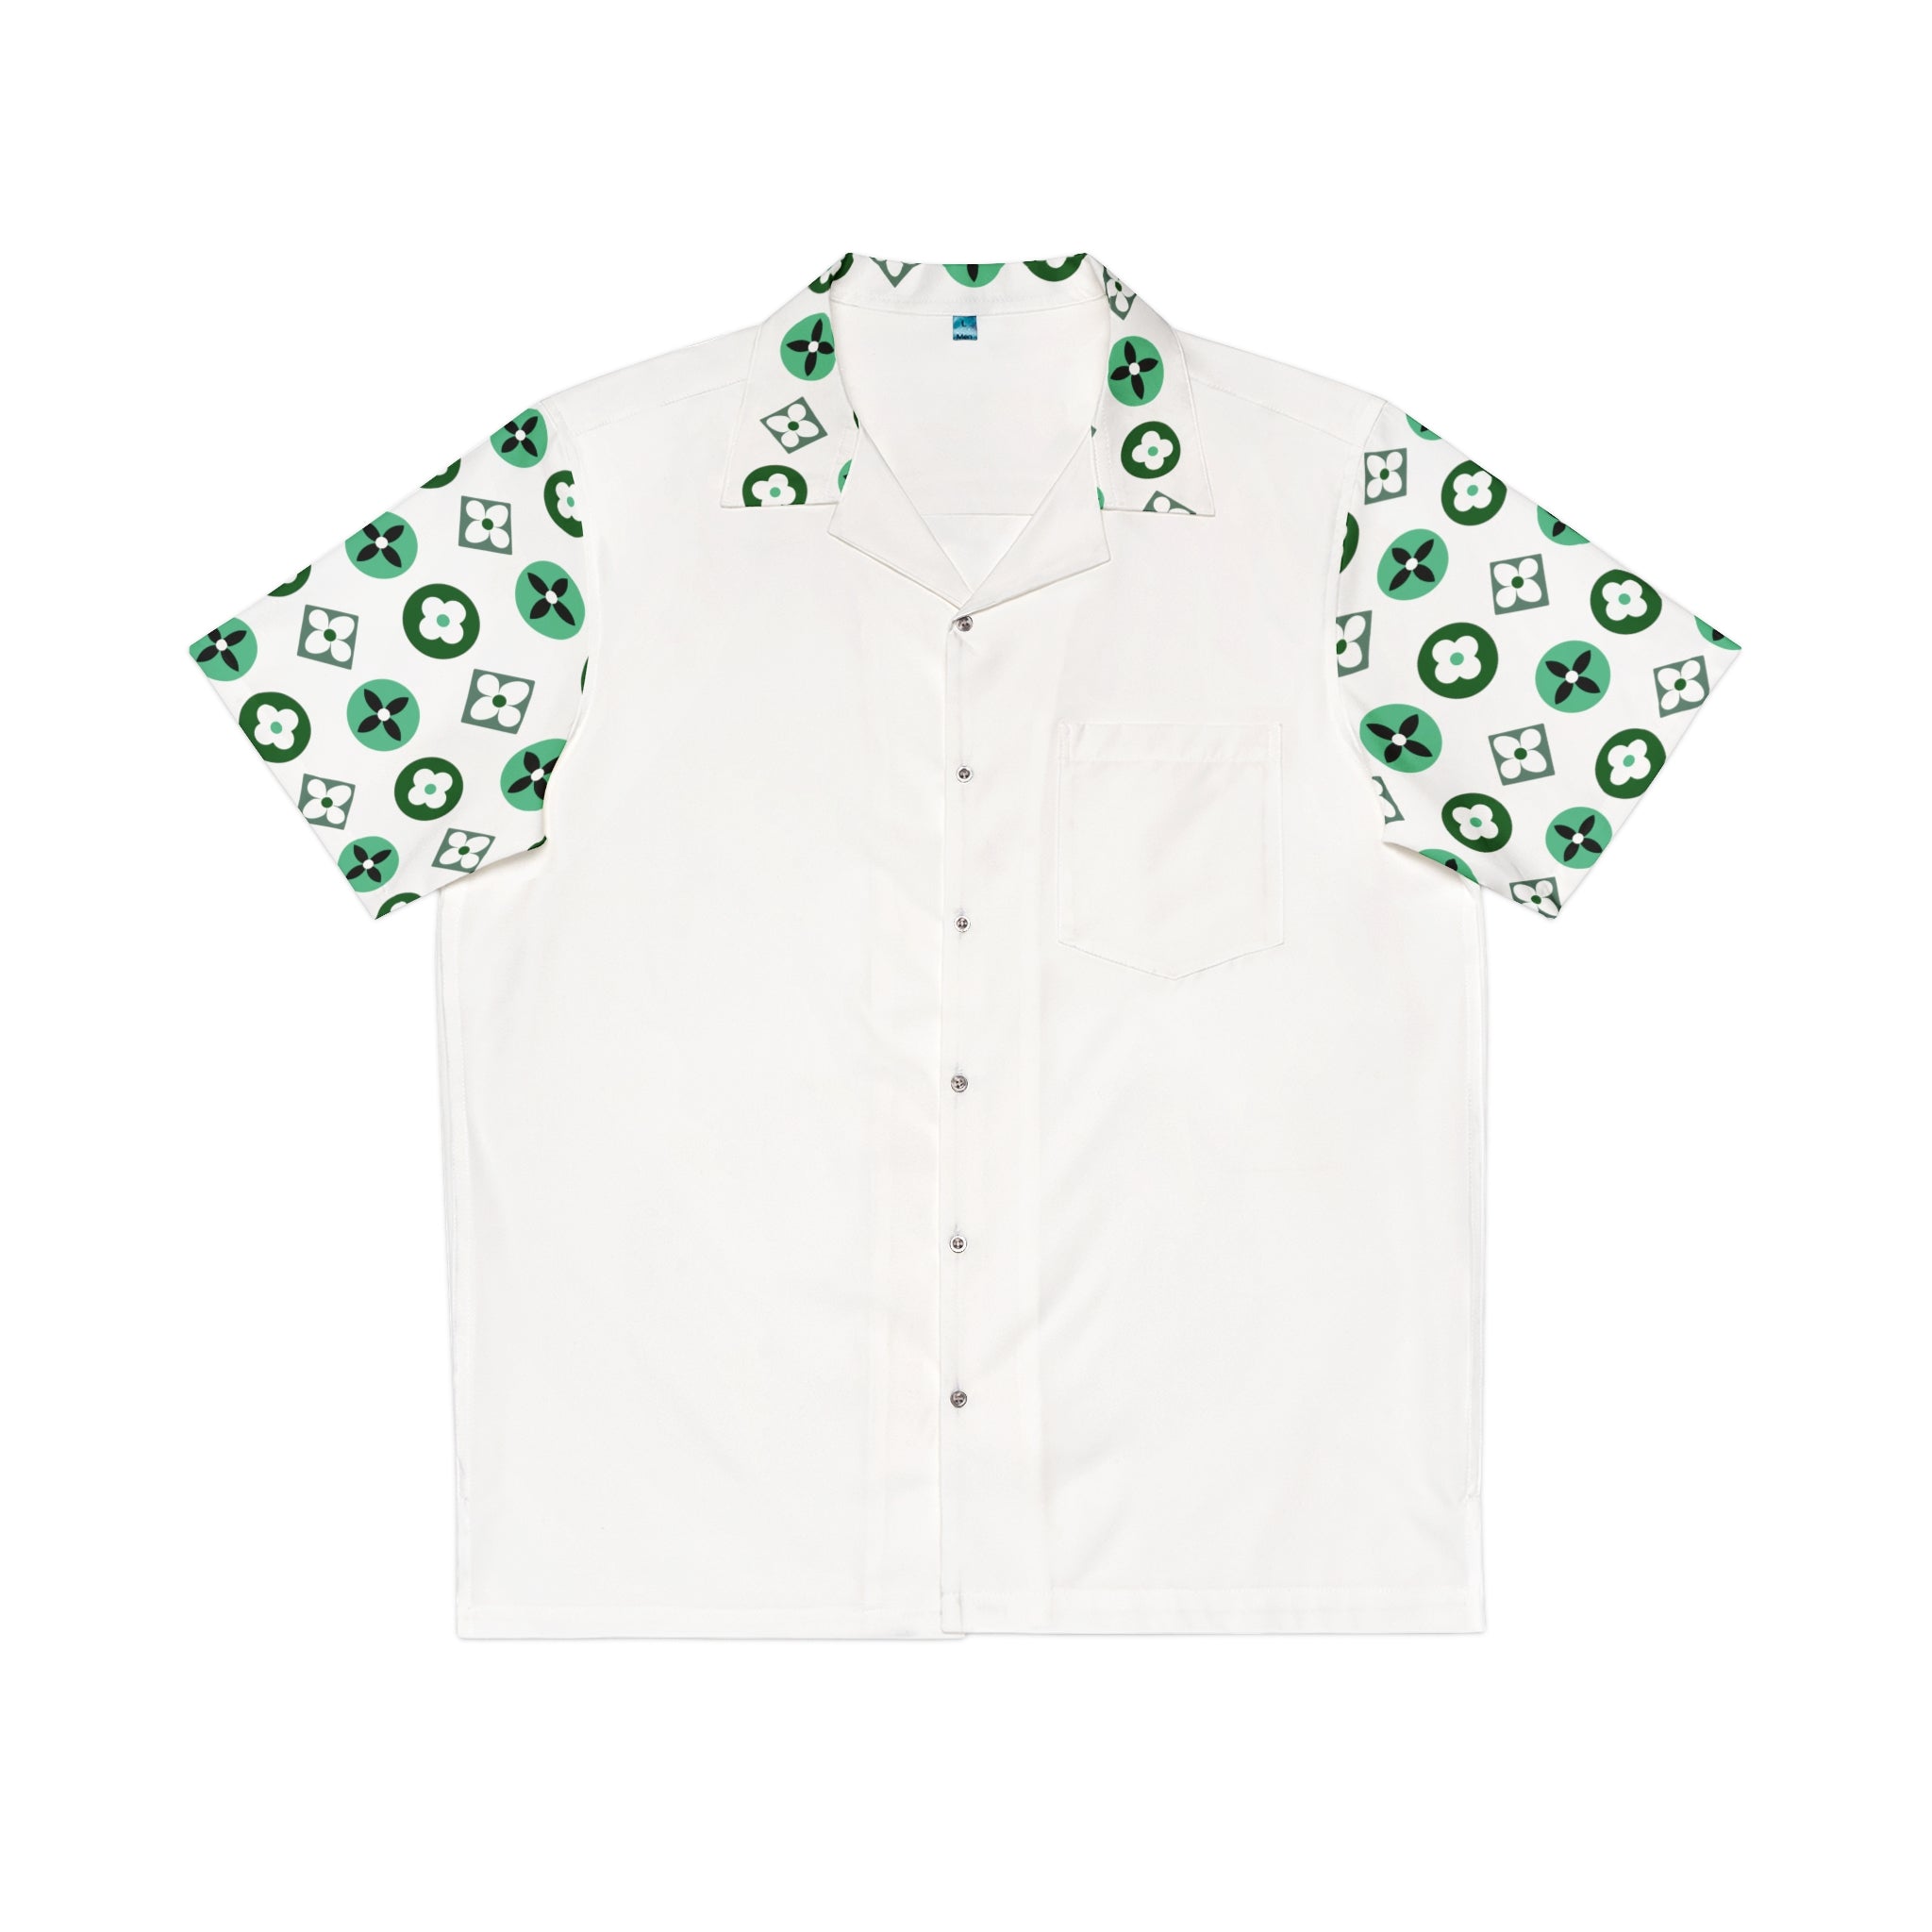  Groove Collection Trilogy of Icons Solid Block (Greens) White Unisex Gender Neutral Button Up Shirt, Hawaiian Shirt Men's Shirts5XLWhite